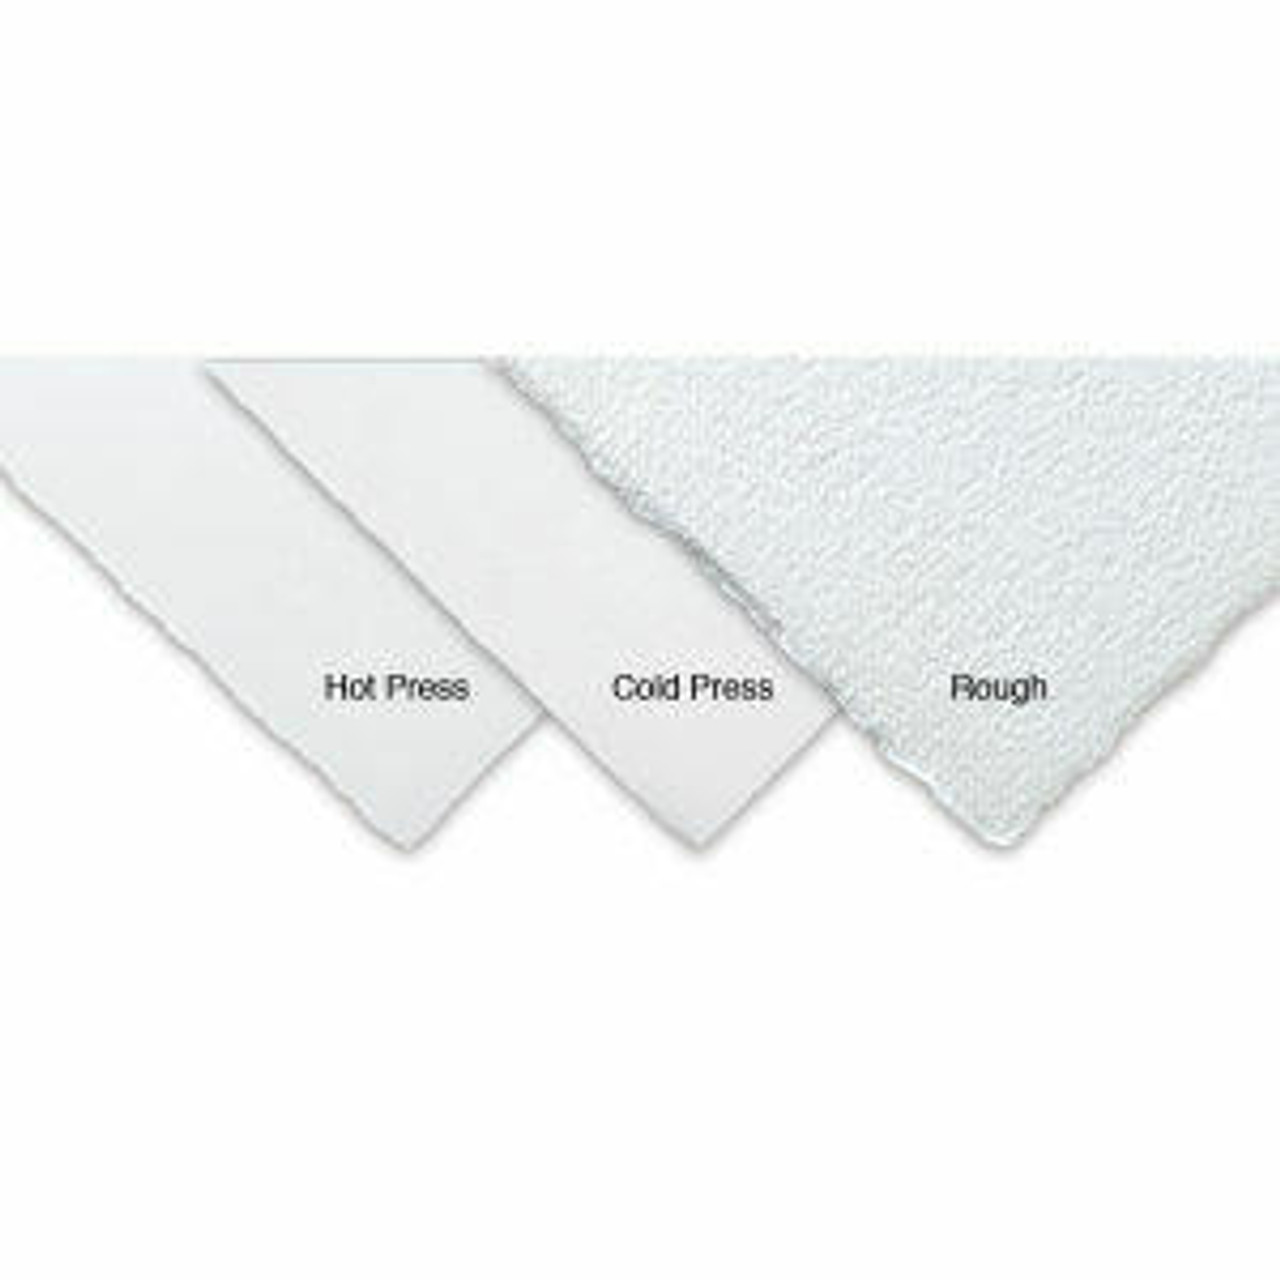 Arches 1795046 22 inch x 30 inch 300 Lb./640g Hot Press Watercolor Sheets Bright White UPC Labeled 5-Pack